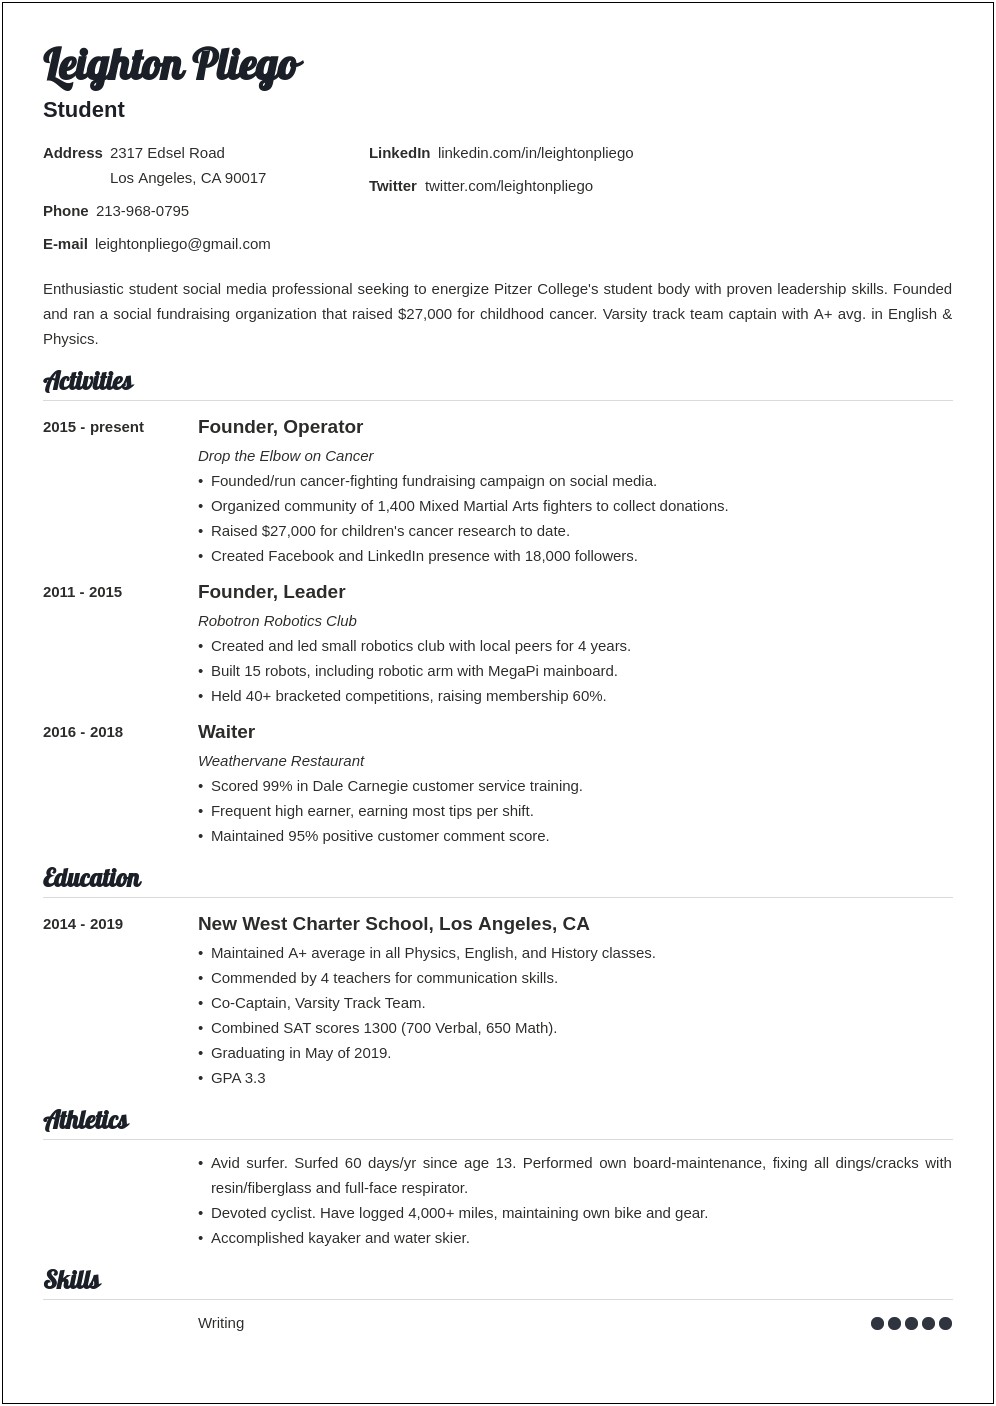 Resume Sheet For High School Students